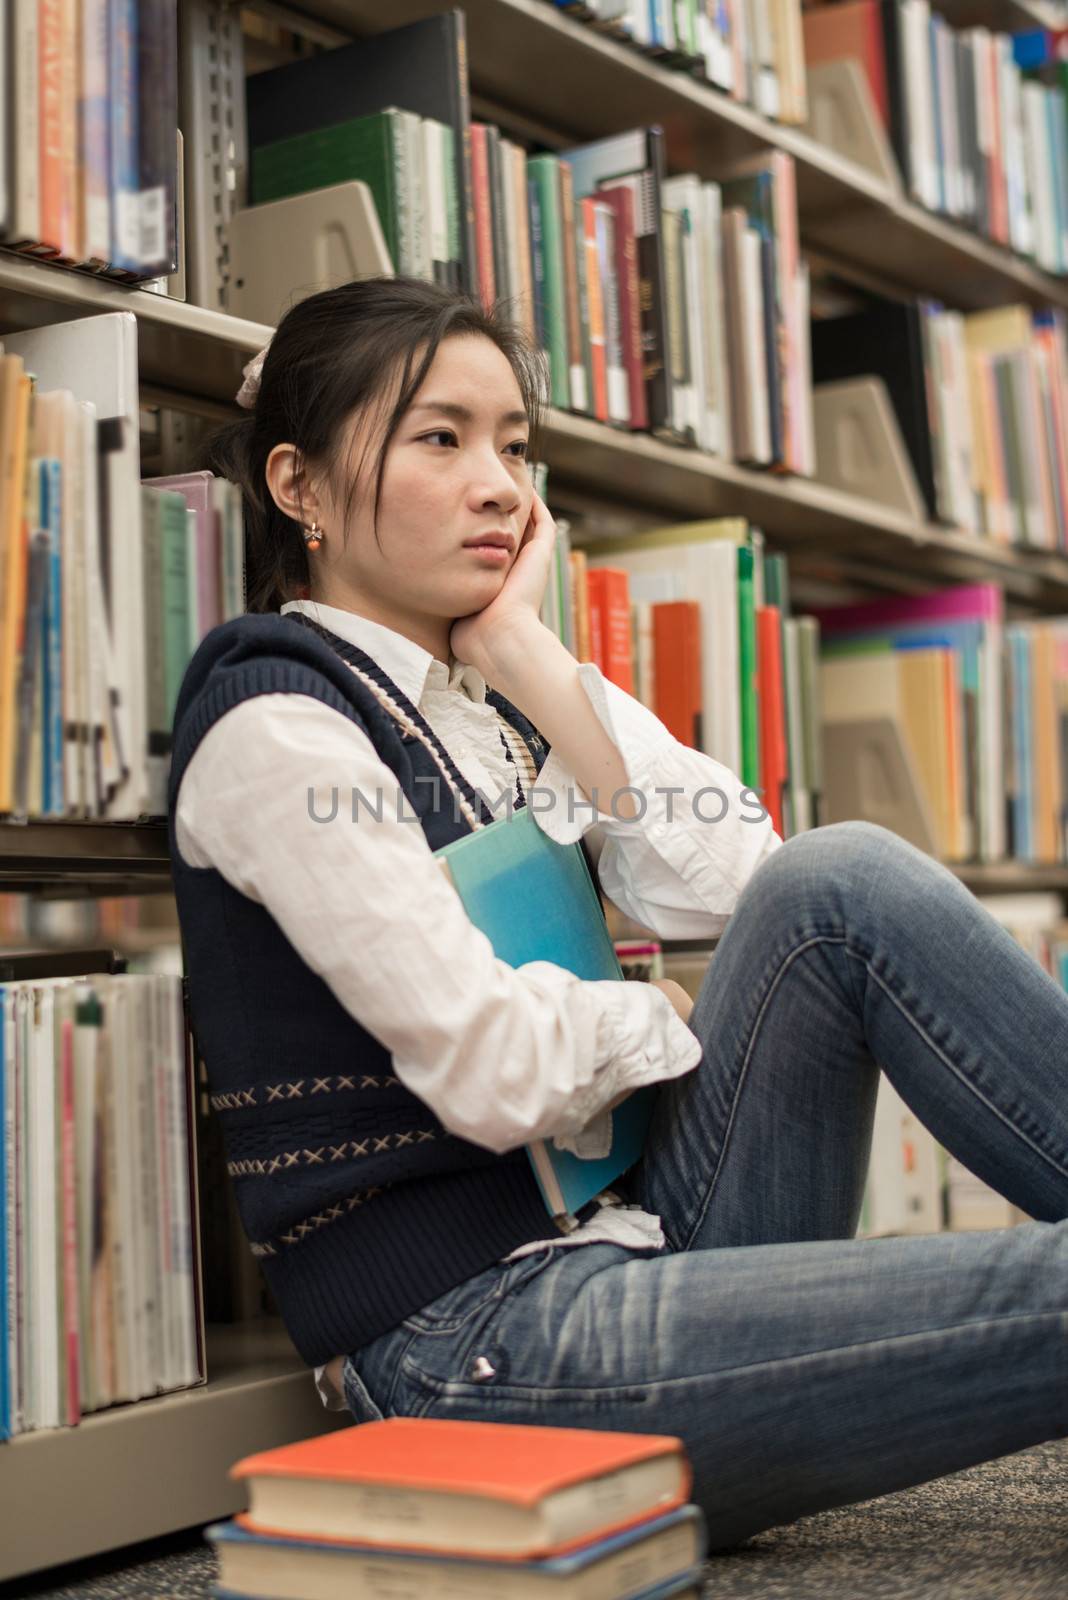 Young female student sitting near a stack of books and a bookshelf looking depressed